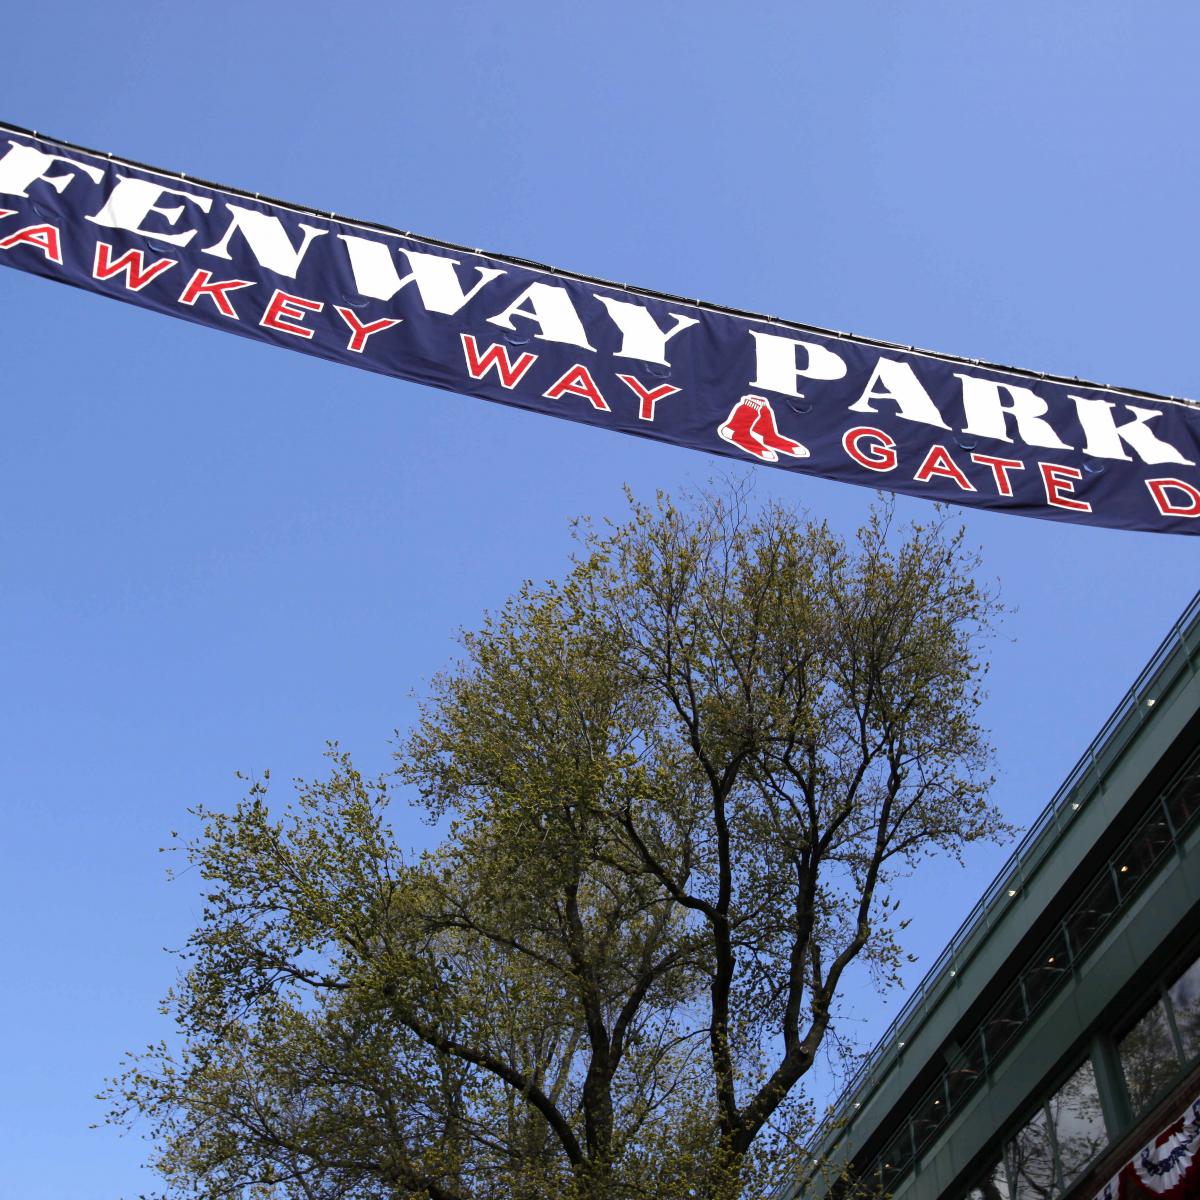 Red Sox file petition to officially change name of Yawkey Way